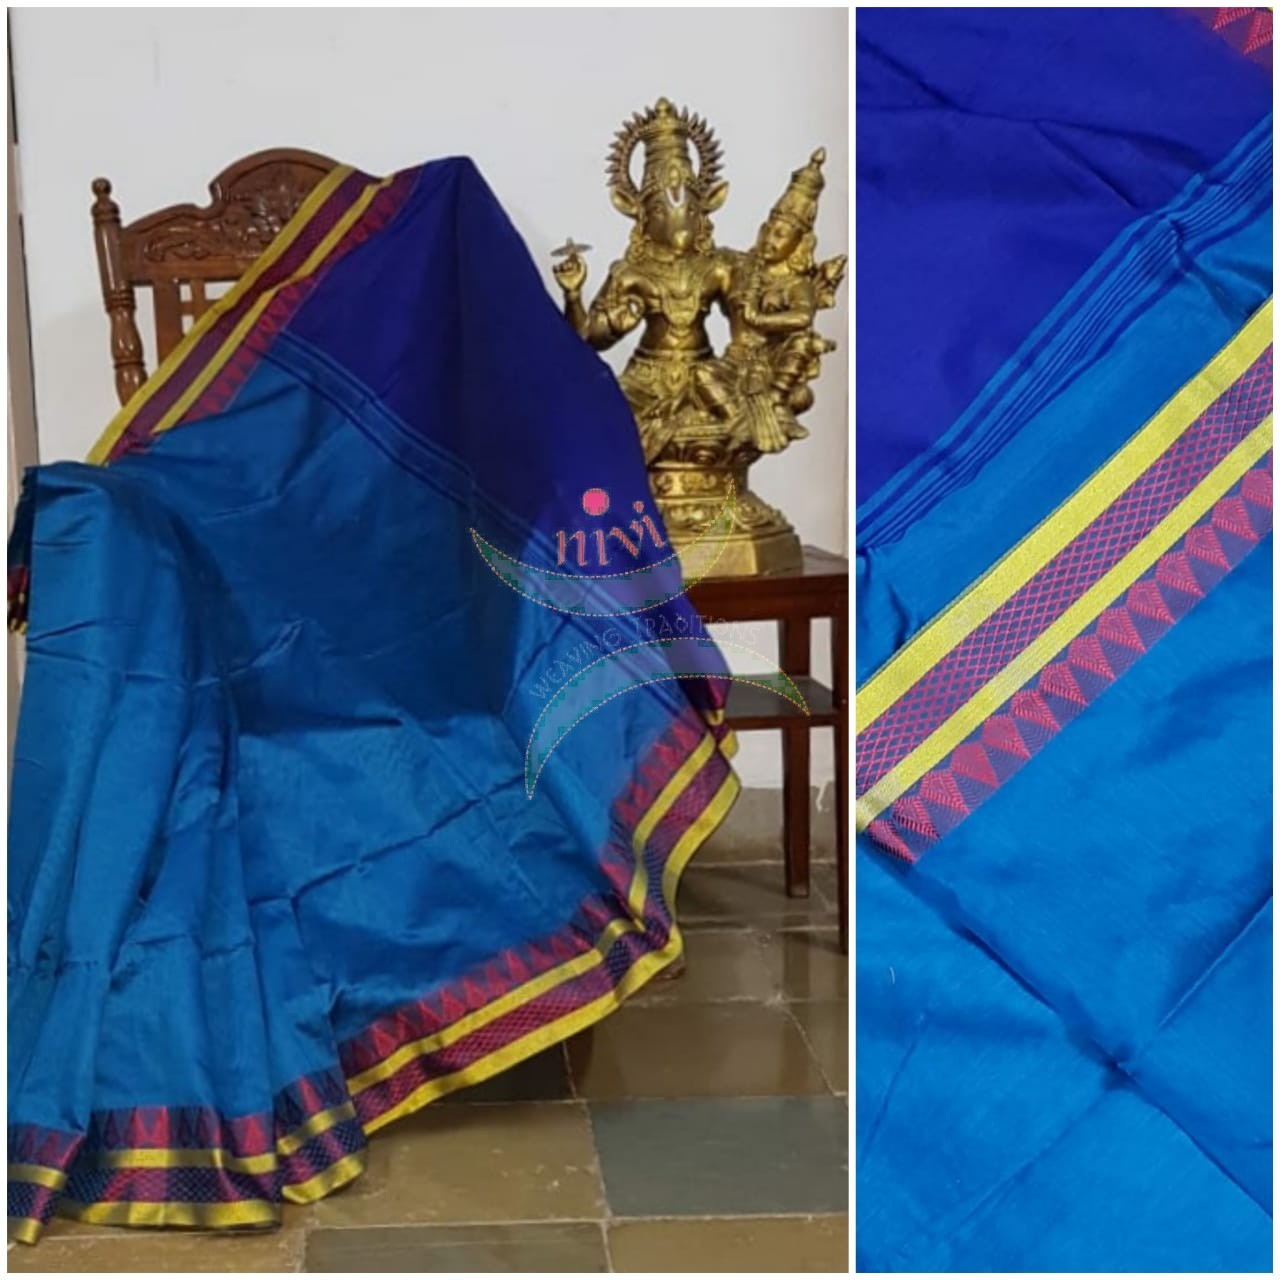 Royal blue Bengal handloom cotton blend with temple border and contrasting navy blue pallu  and blouse.